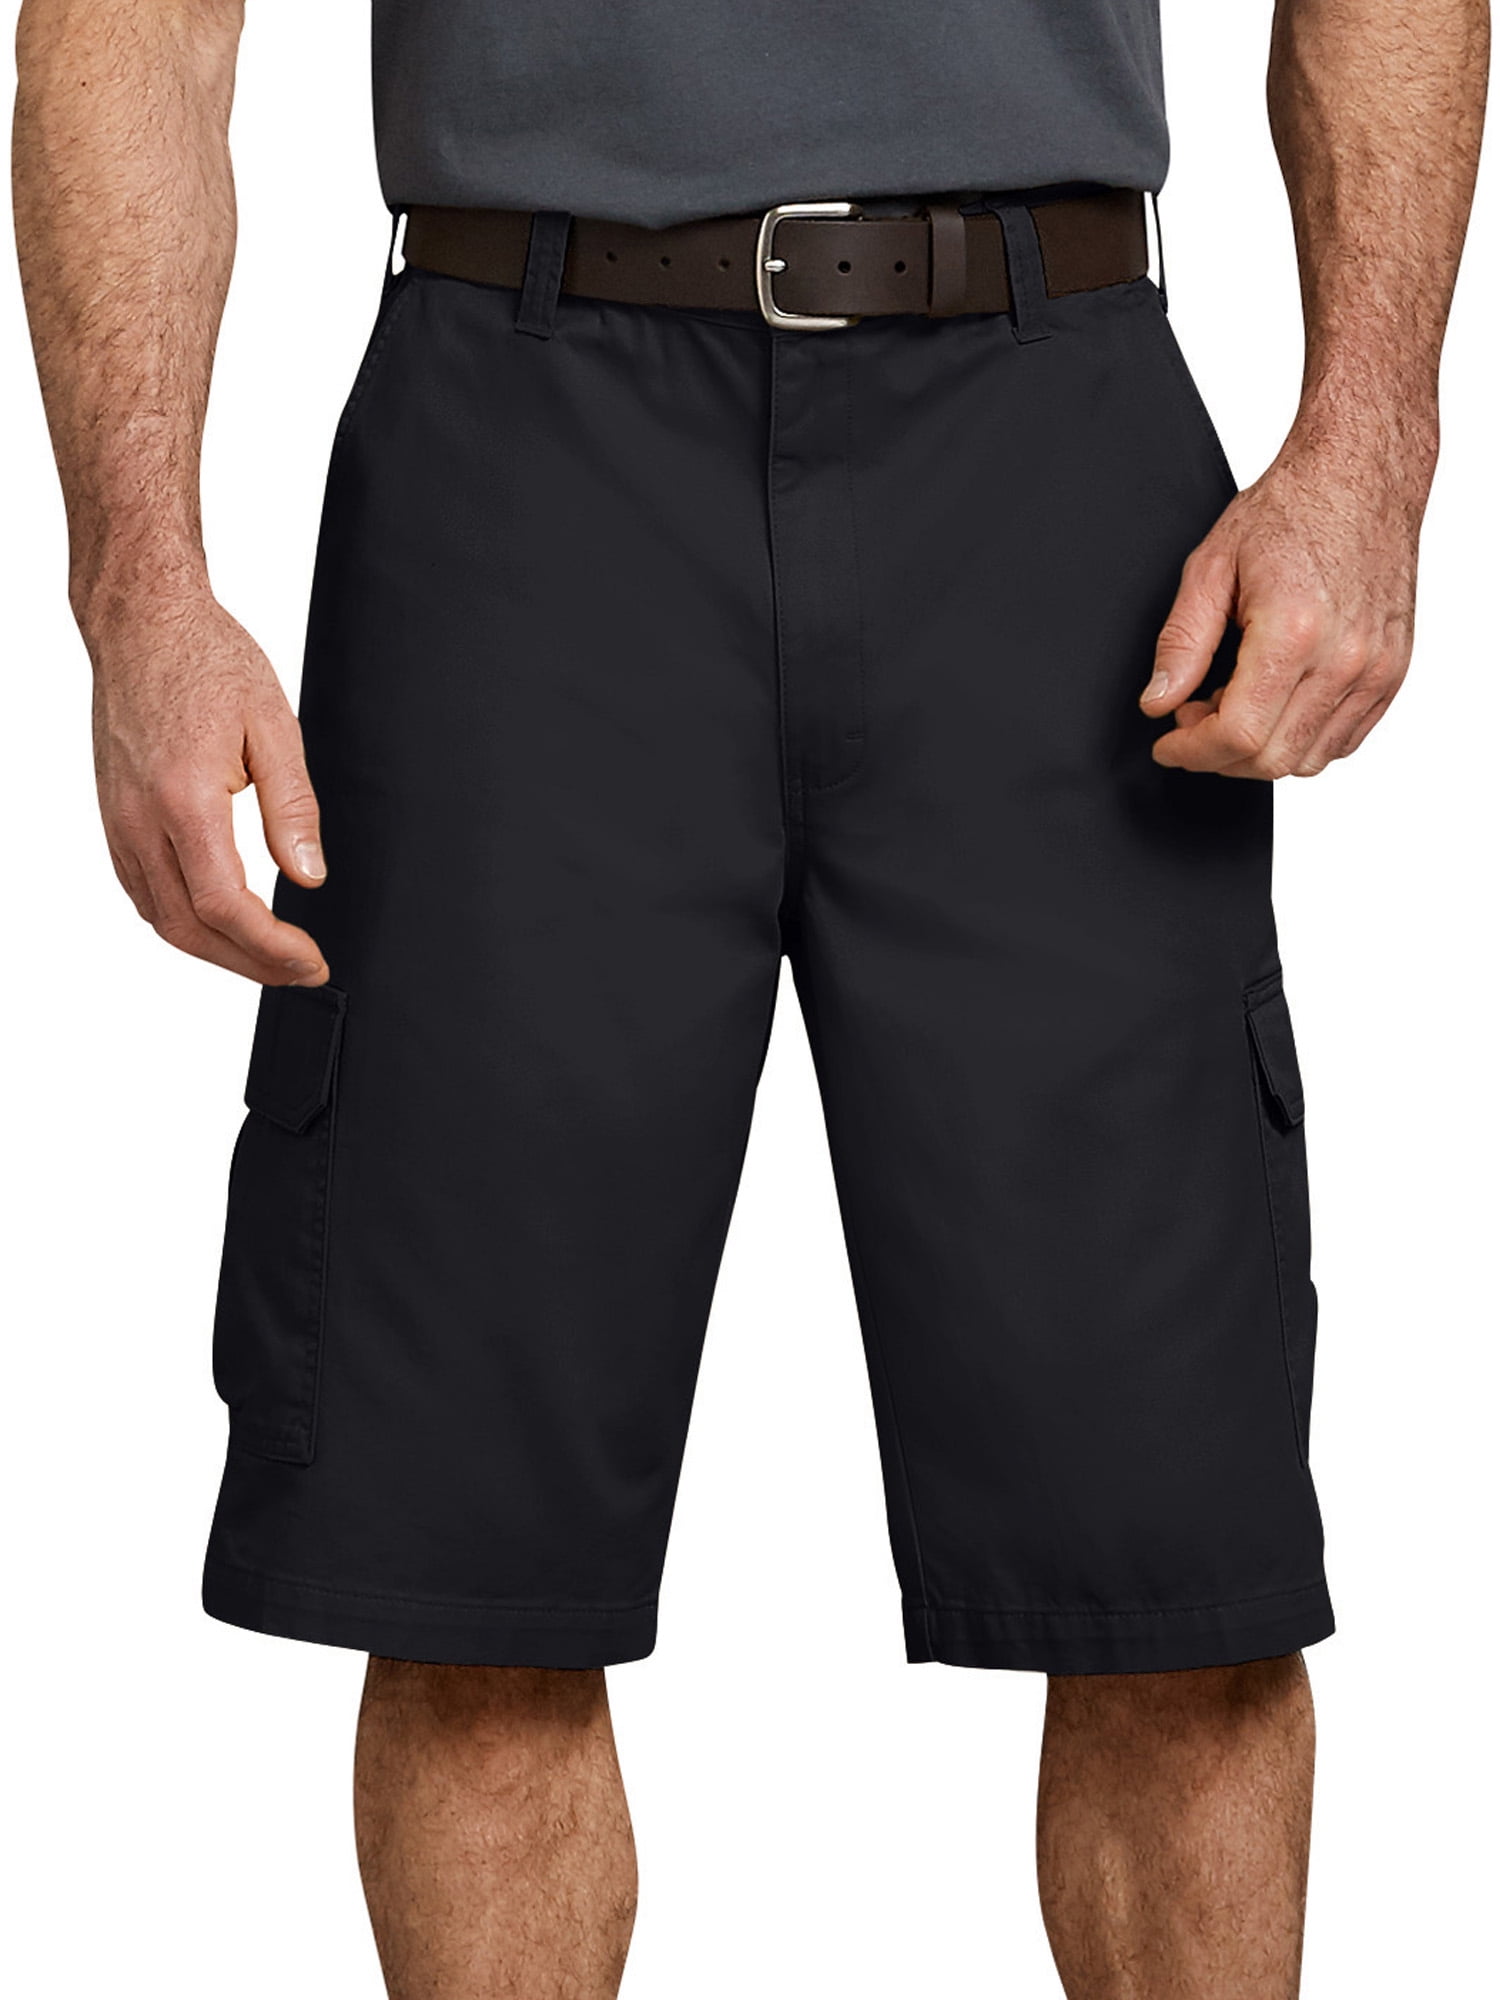 Note: The biggest launch of the century About Men's Shorts